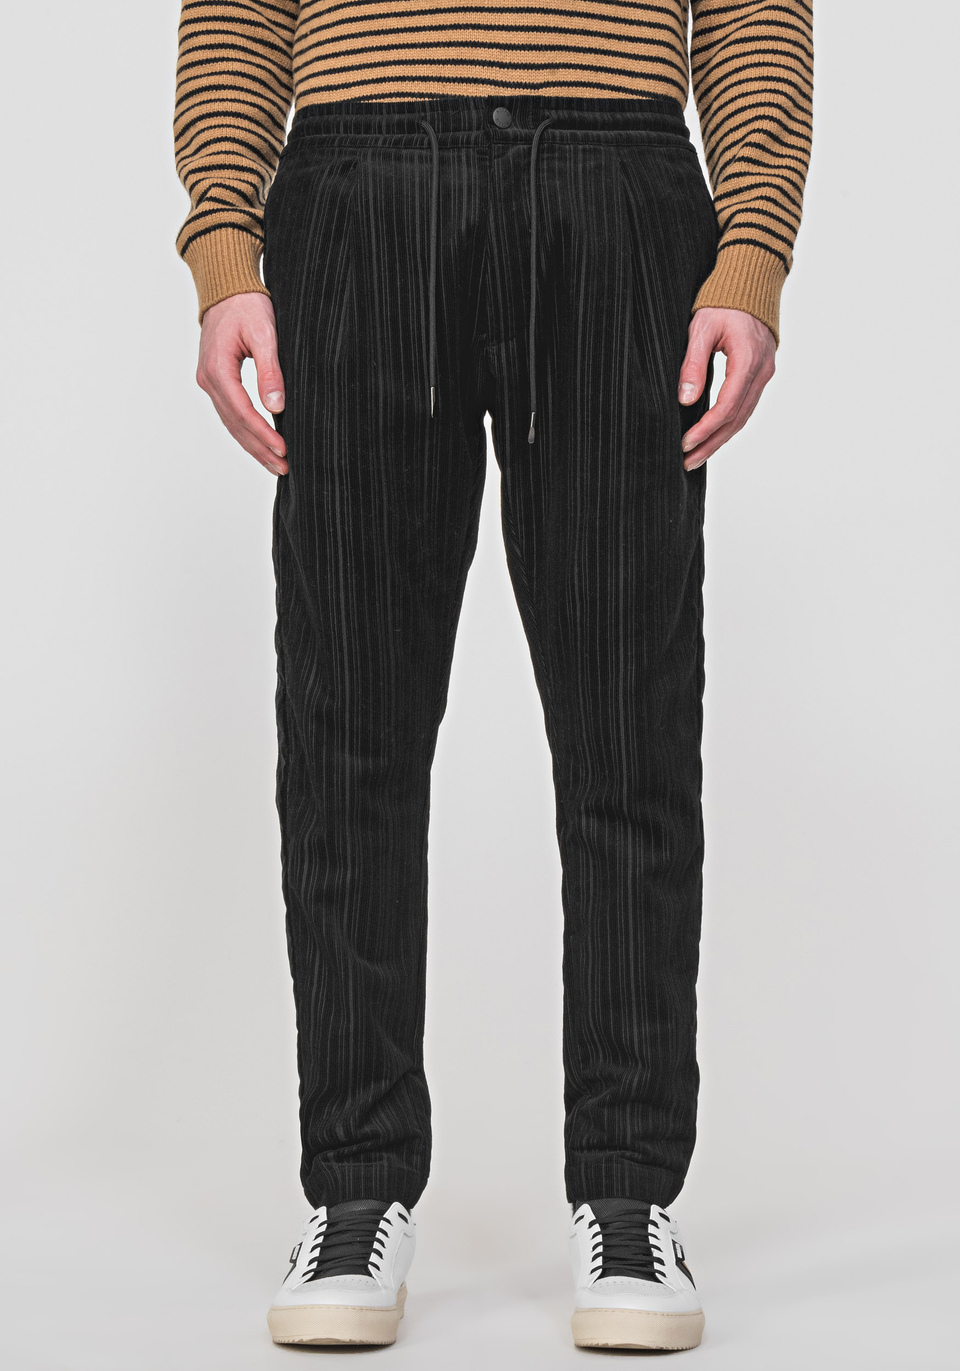 CARROT-FIT TROUSERS IN CORDUROY WITH SATIN-EFFECT SIDE BANDS - Antony Morato Online Shop